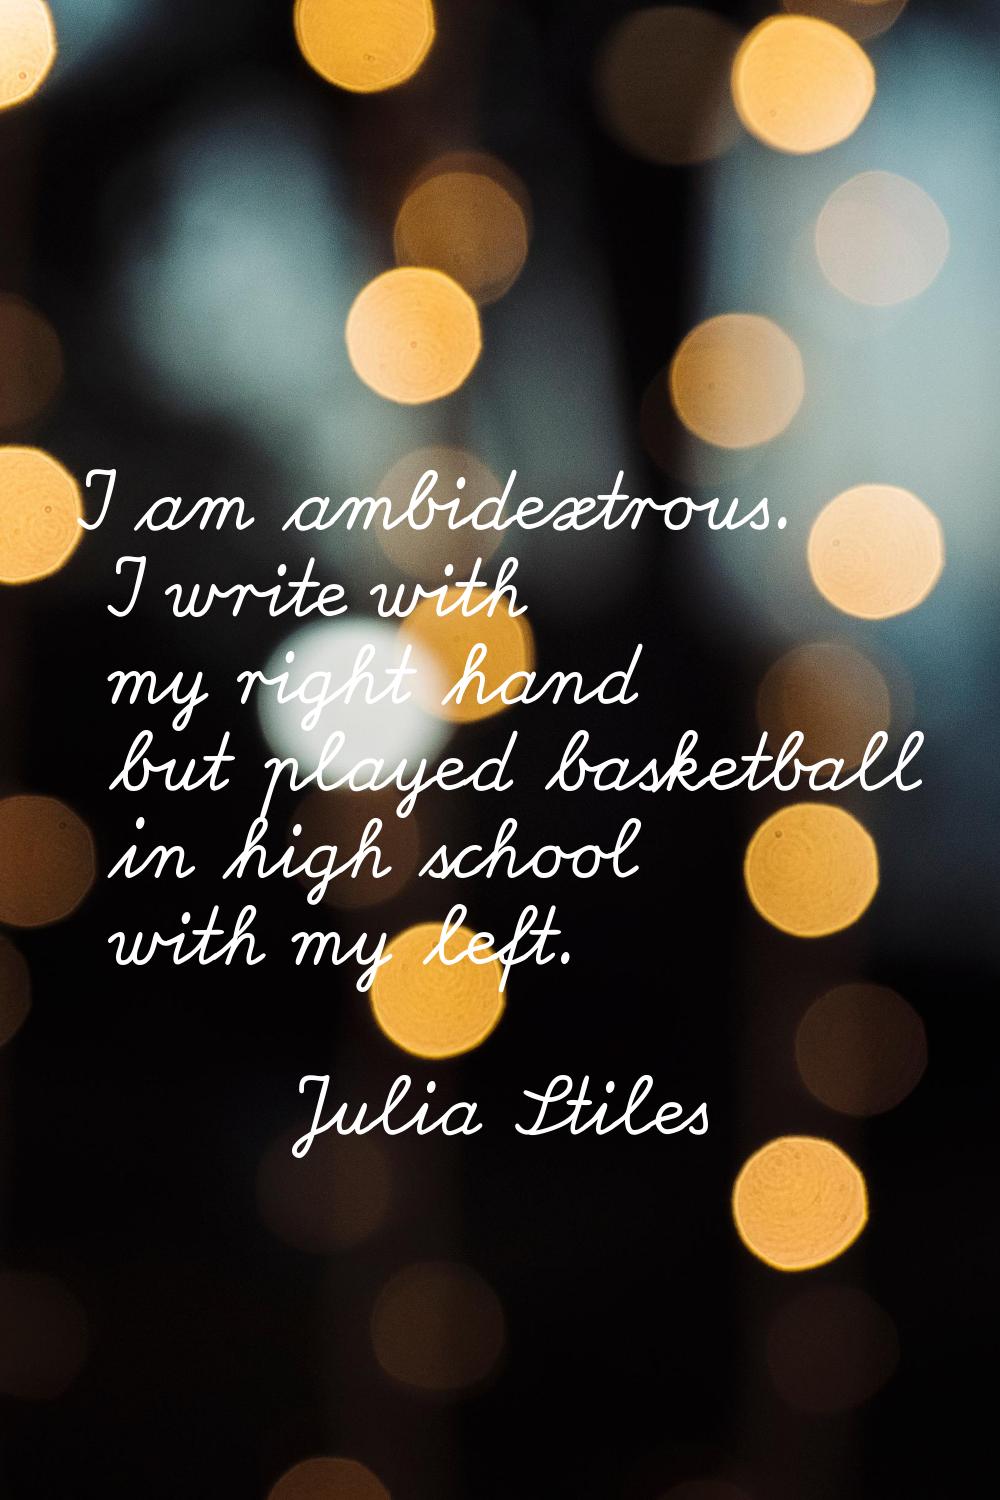 I am ambidextrous. I write with my right hand but played basketball in high school with my left.